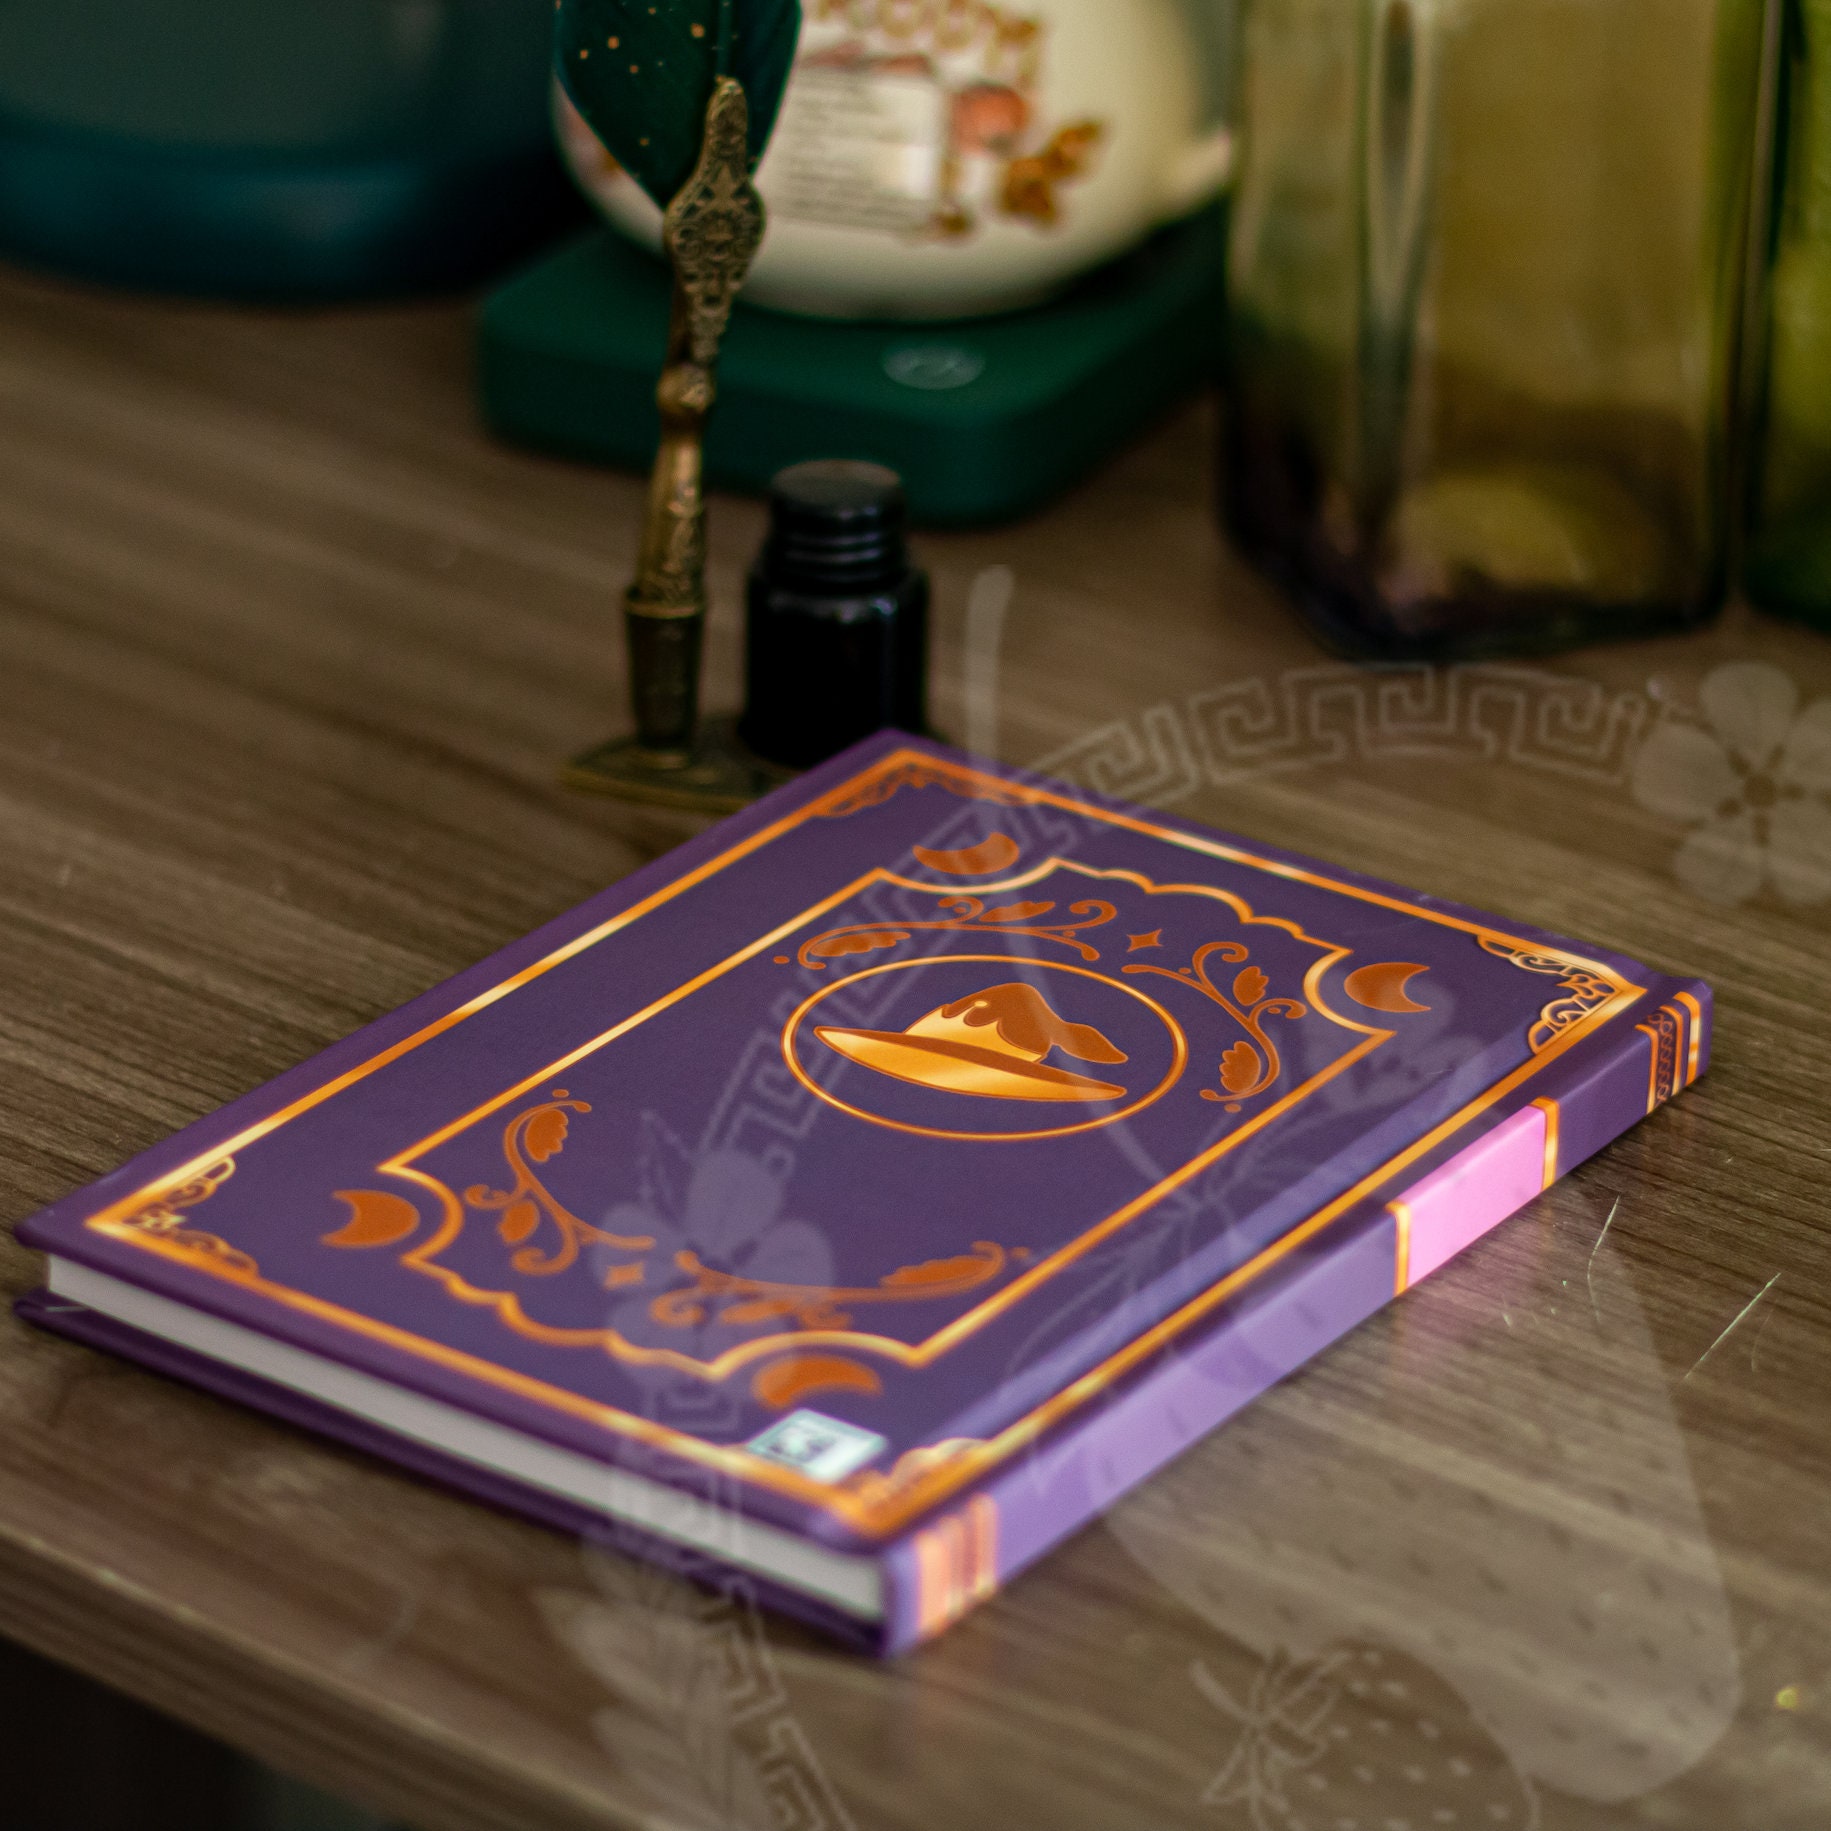 The Good Witch Azura Journal the Owl House Hexside Bookclub 